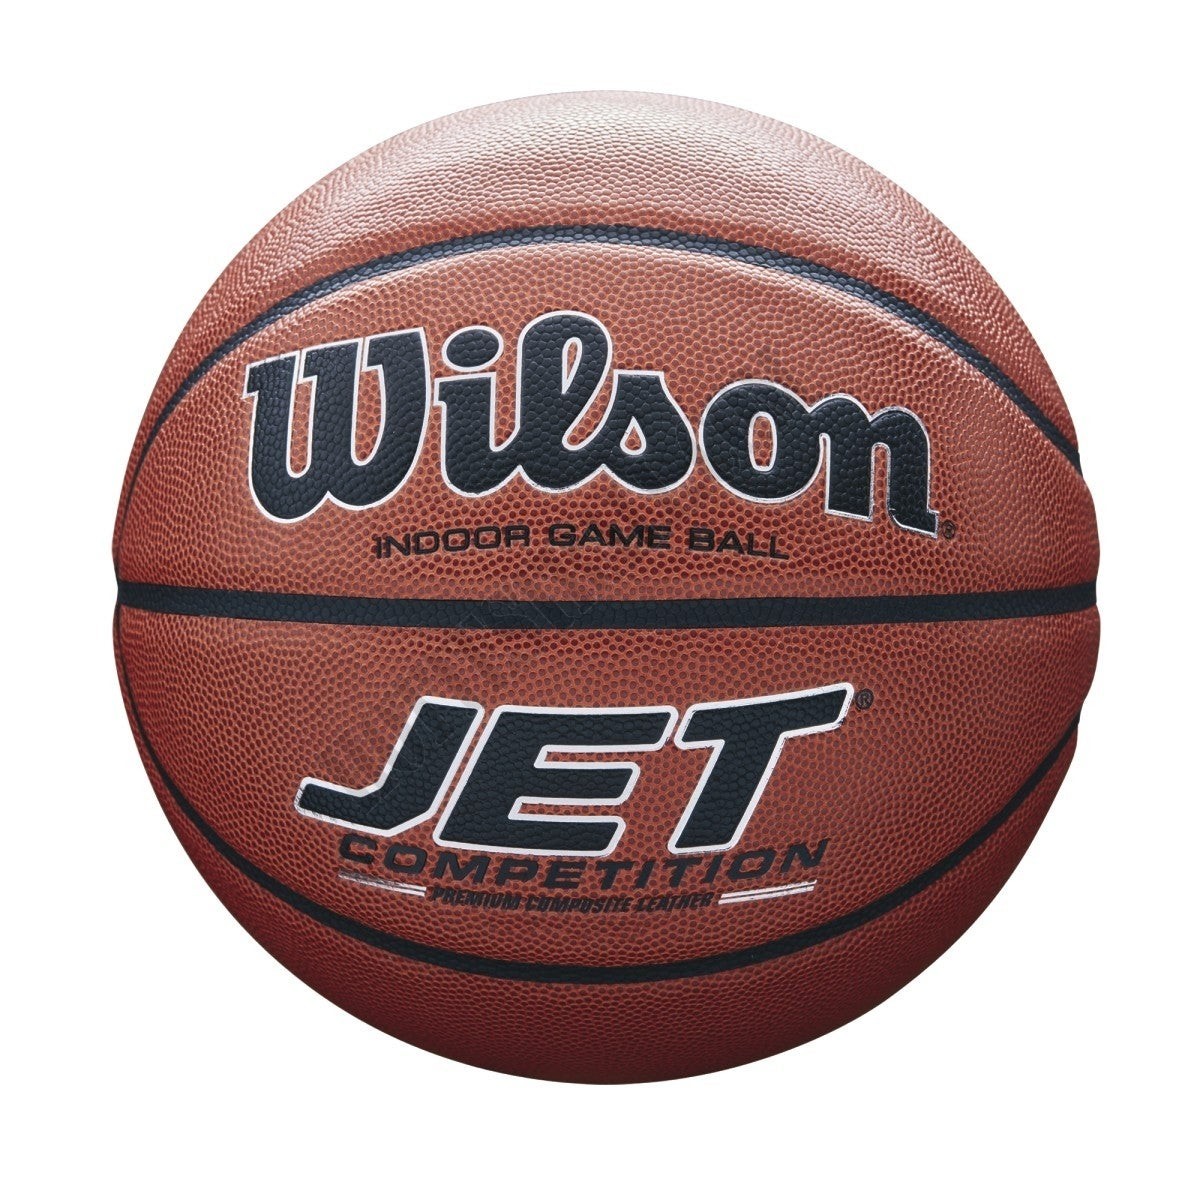 Jet Competition Basketball - Wilson Discount Store - -0